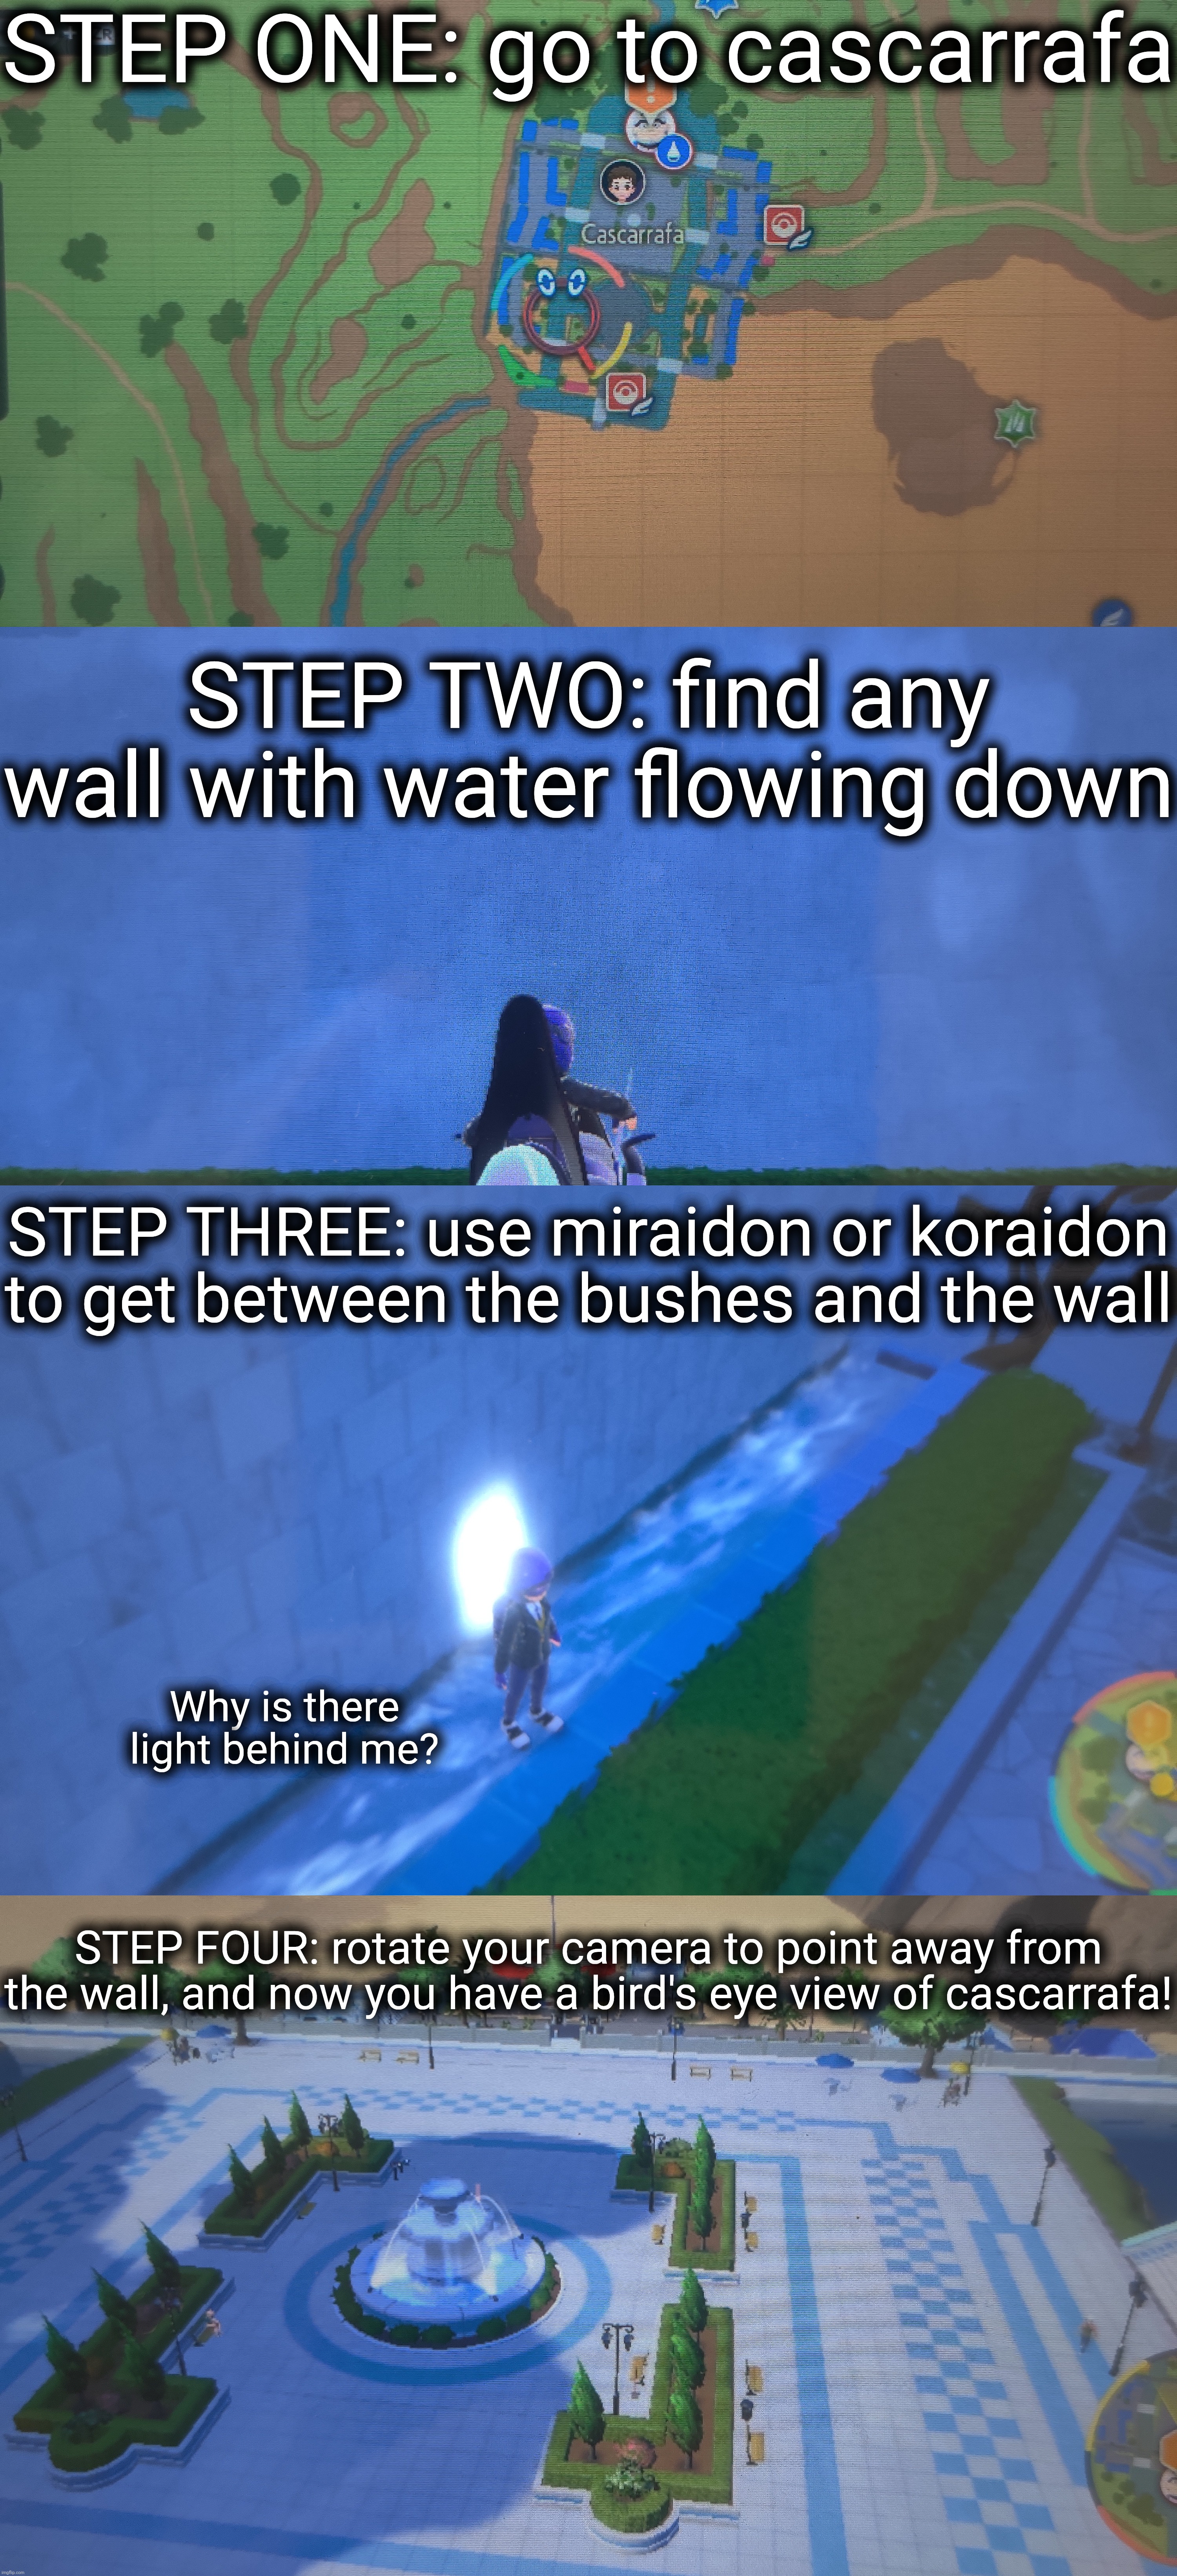 A little glitch tutorial for ya | STEP ONE: go to cascarrafa; STEP TWO: find any wall with water flowing down; STEP THREE: use miraidon or koraidon to get between the bushes and the wall; Why is there light behind me? STEP FOUR: rotate your camera to point away from the wall, and now you have a bird's eye view of cascarrafa! | made w/ Imgflip meme maker